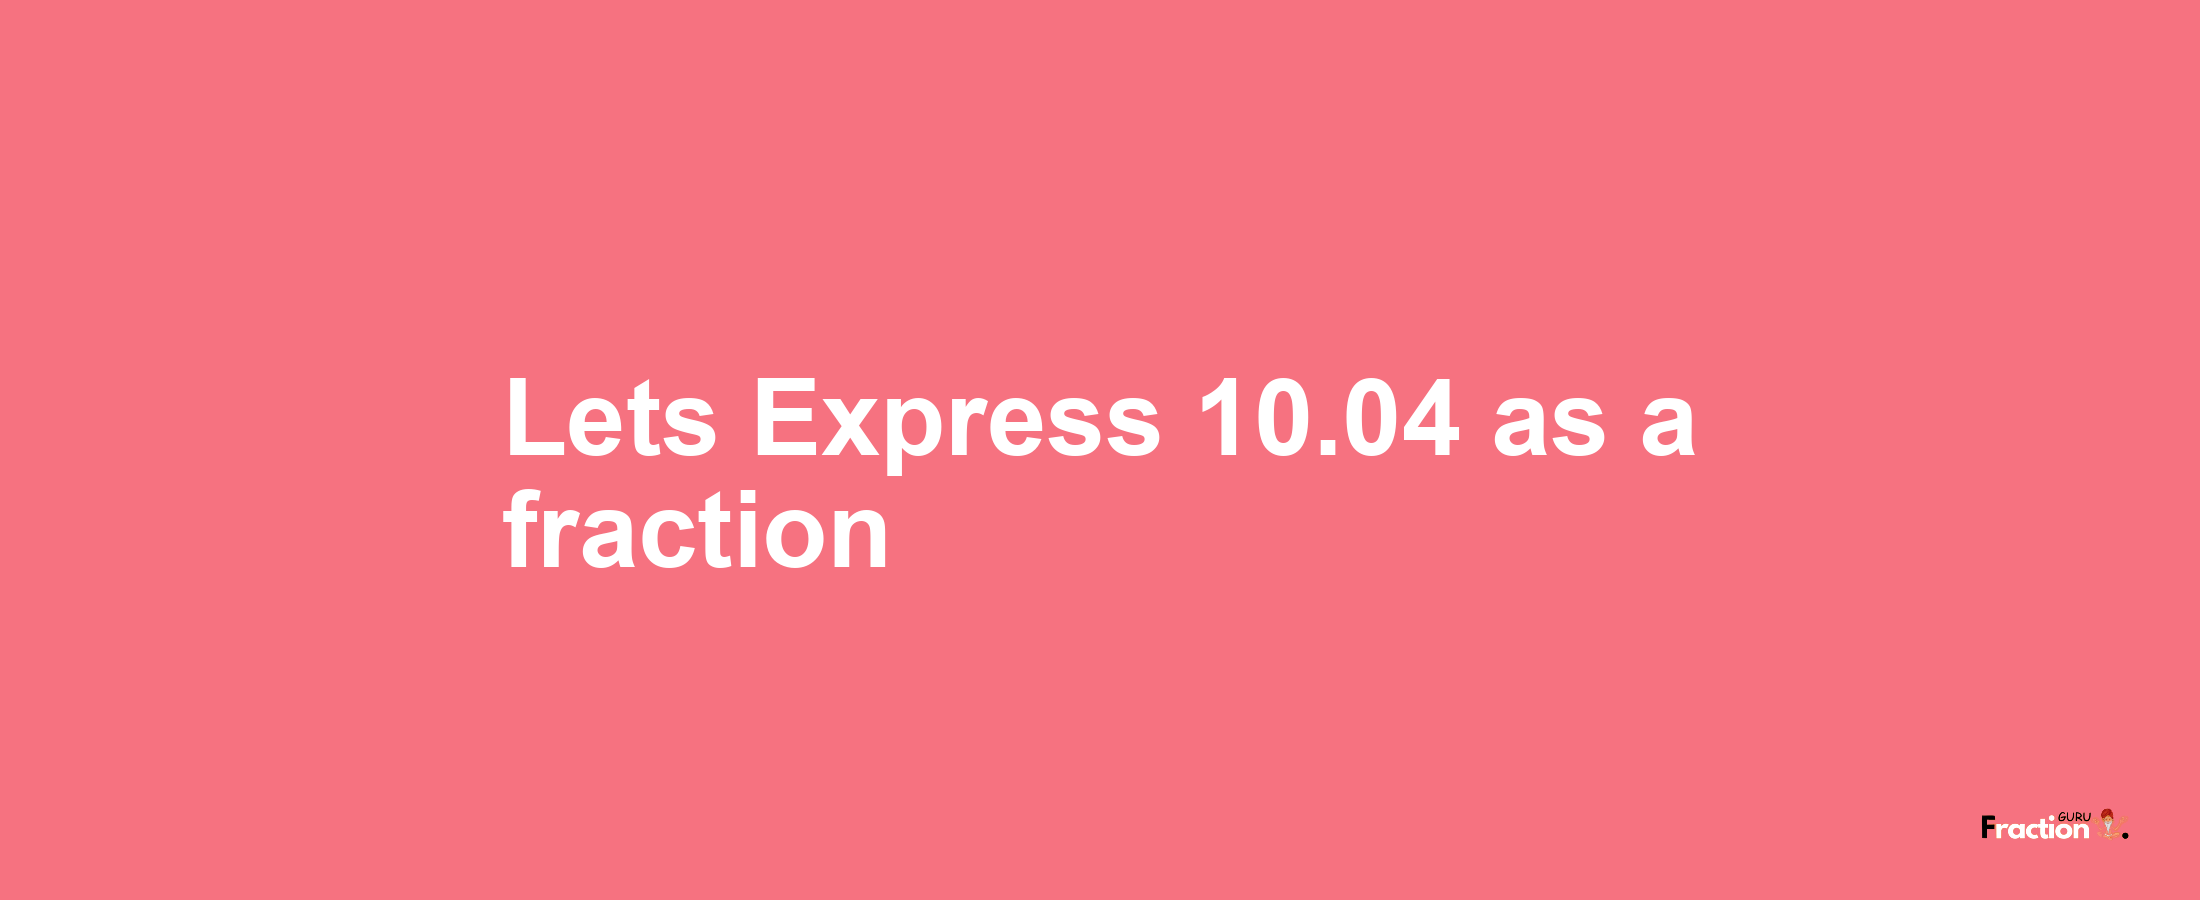 Lets Express 10.04 as afraction